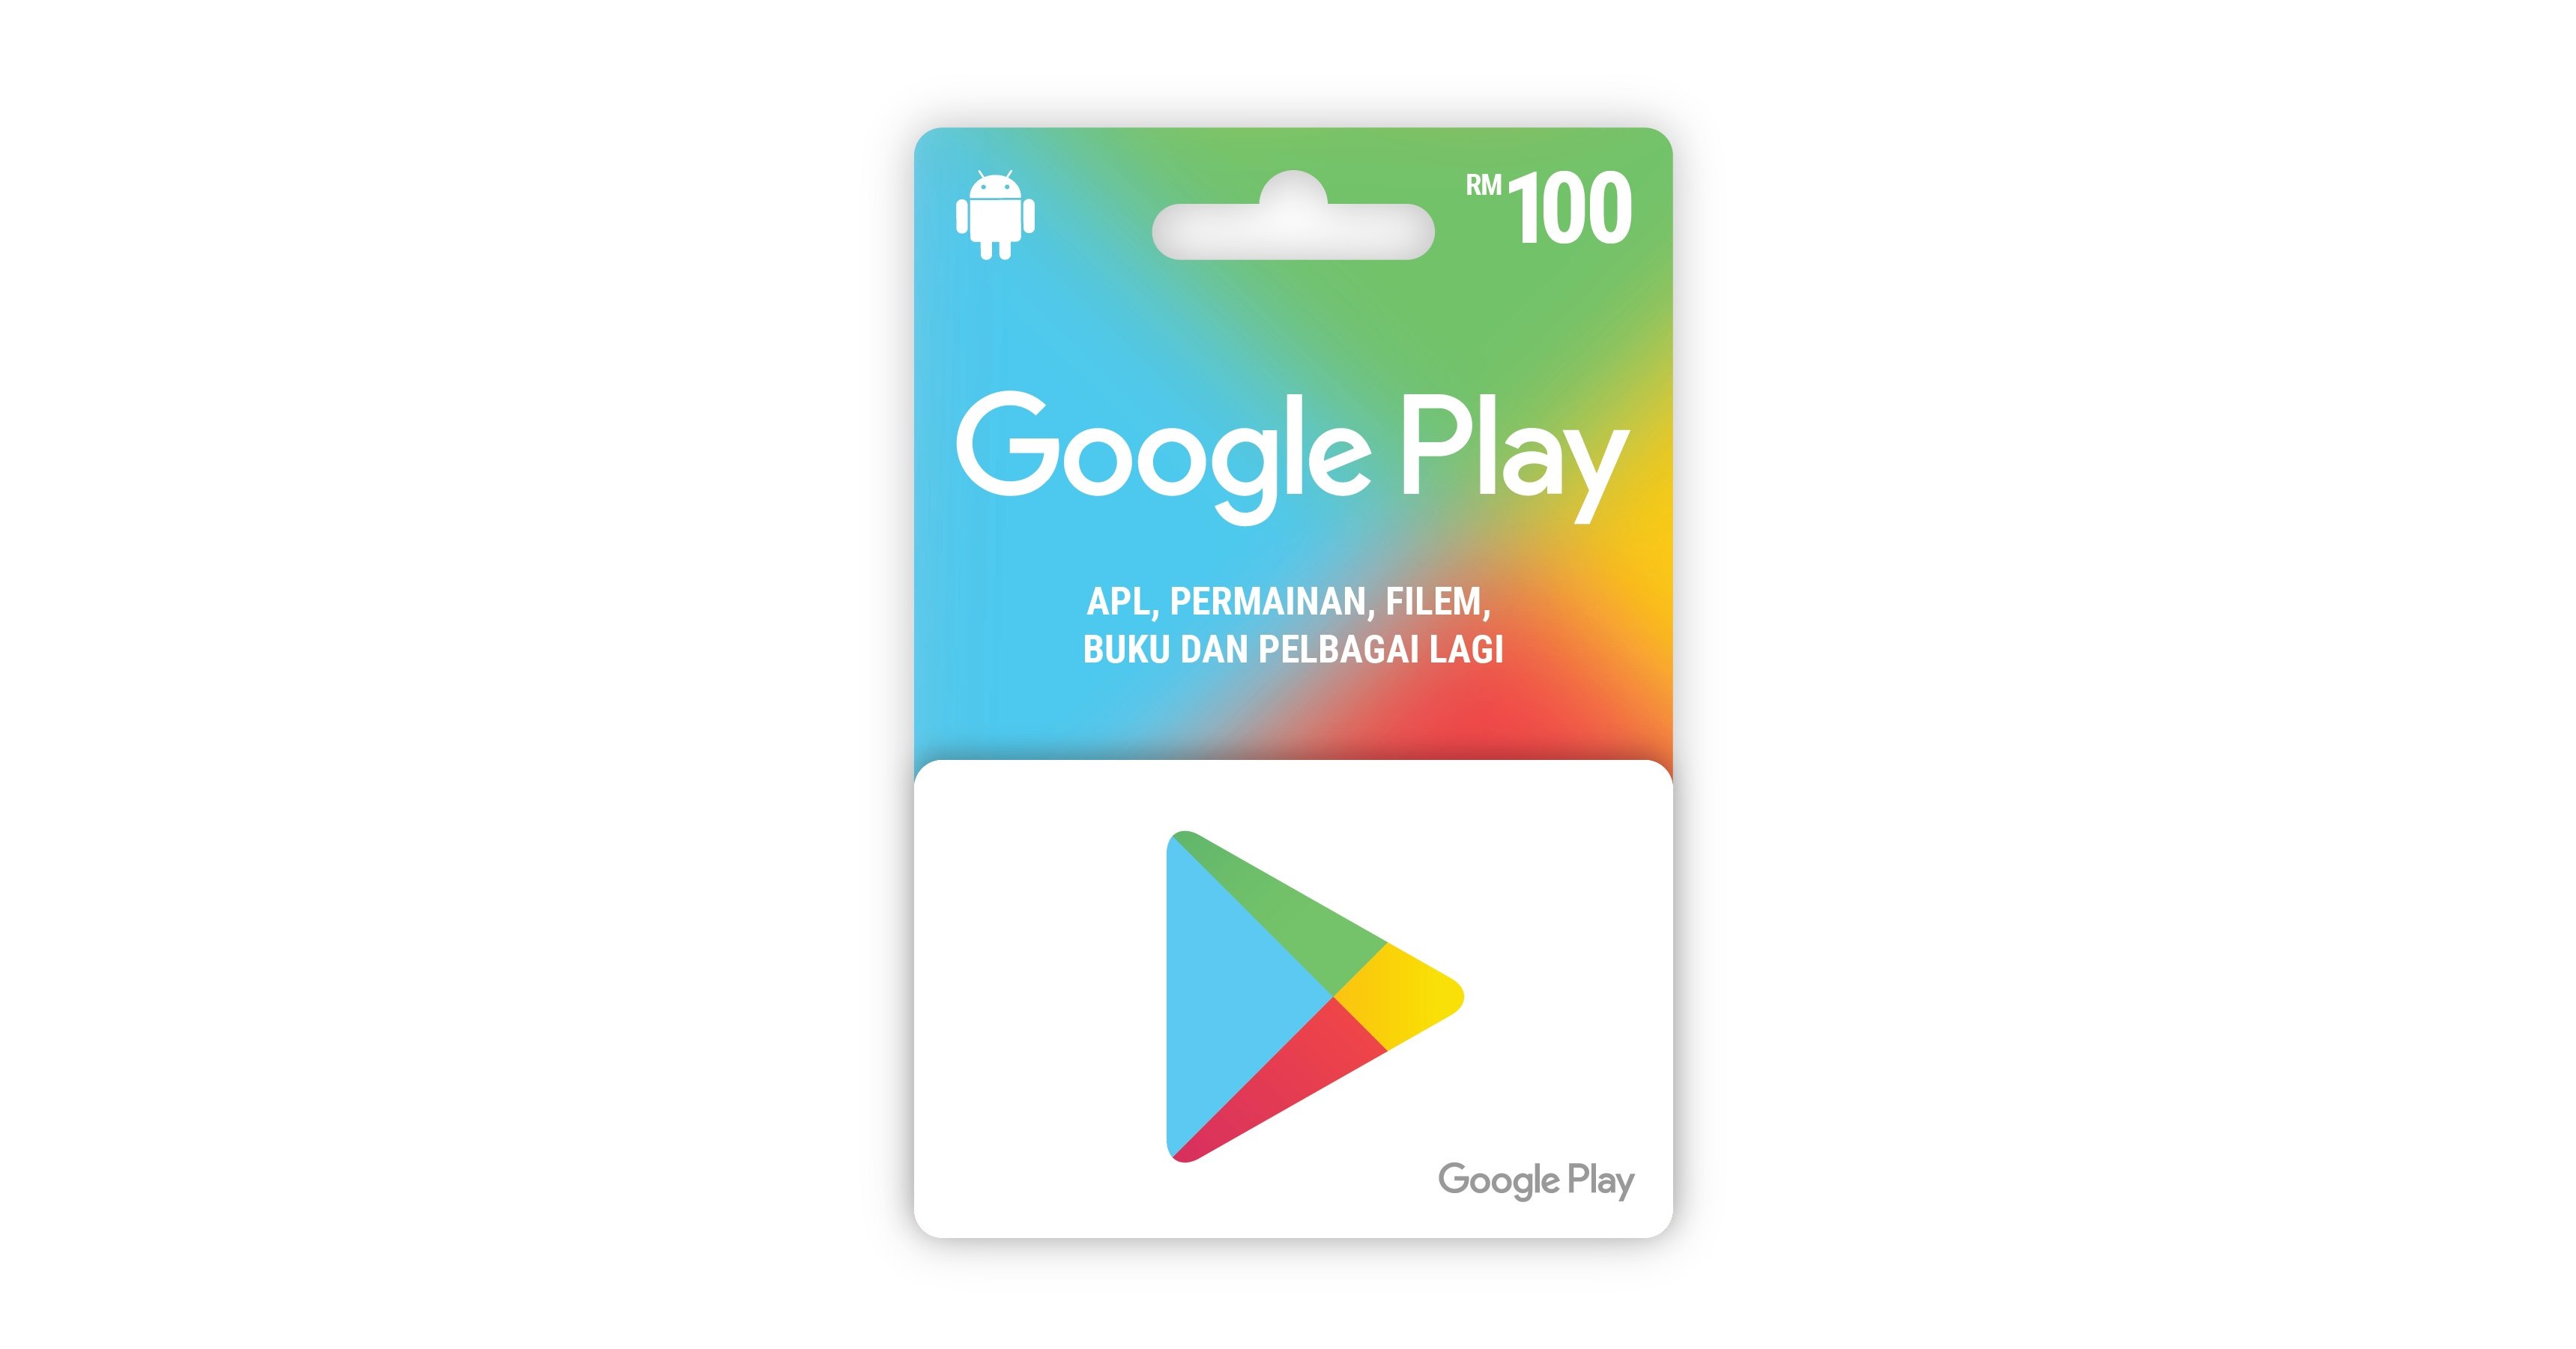 InComm Launches Google Play Gift Cards in Malaysia